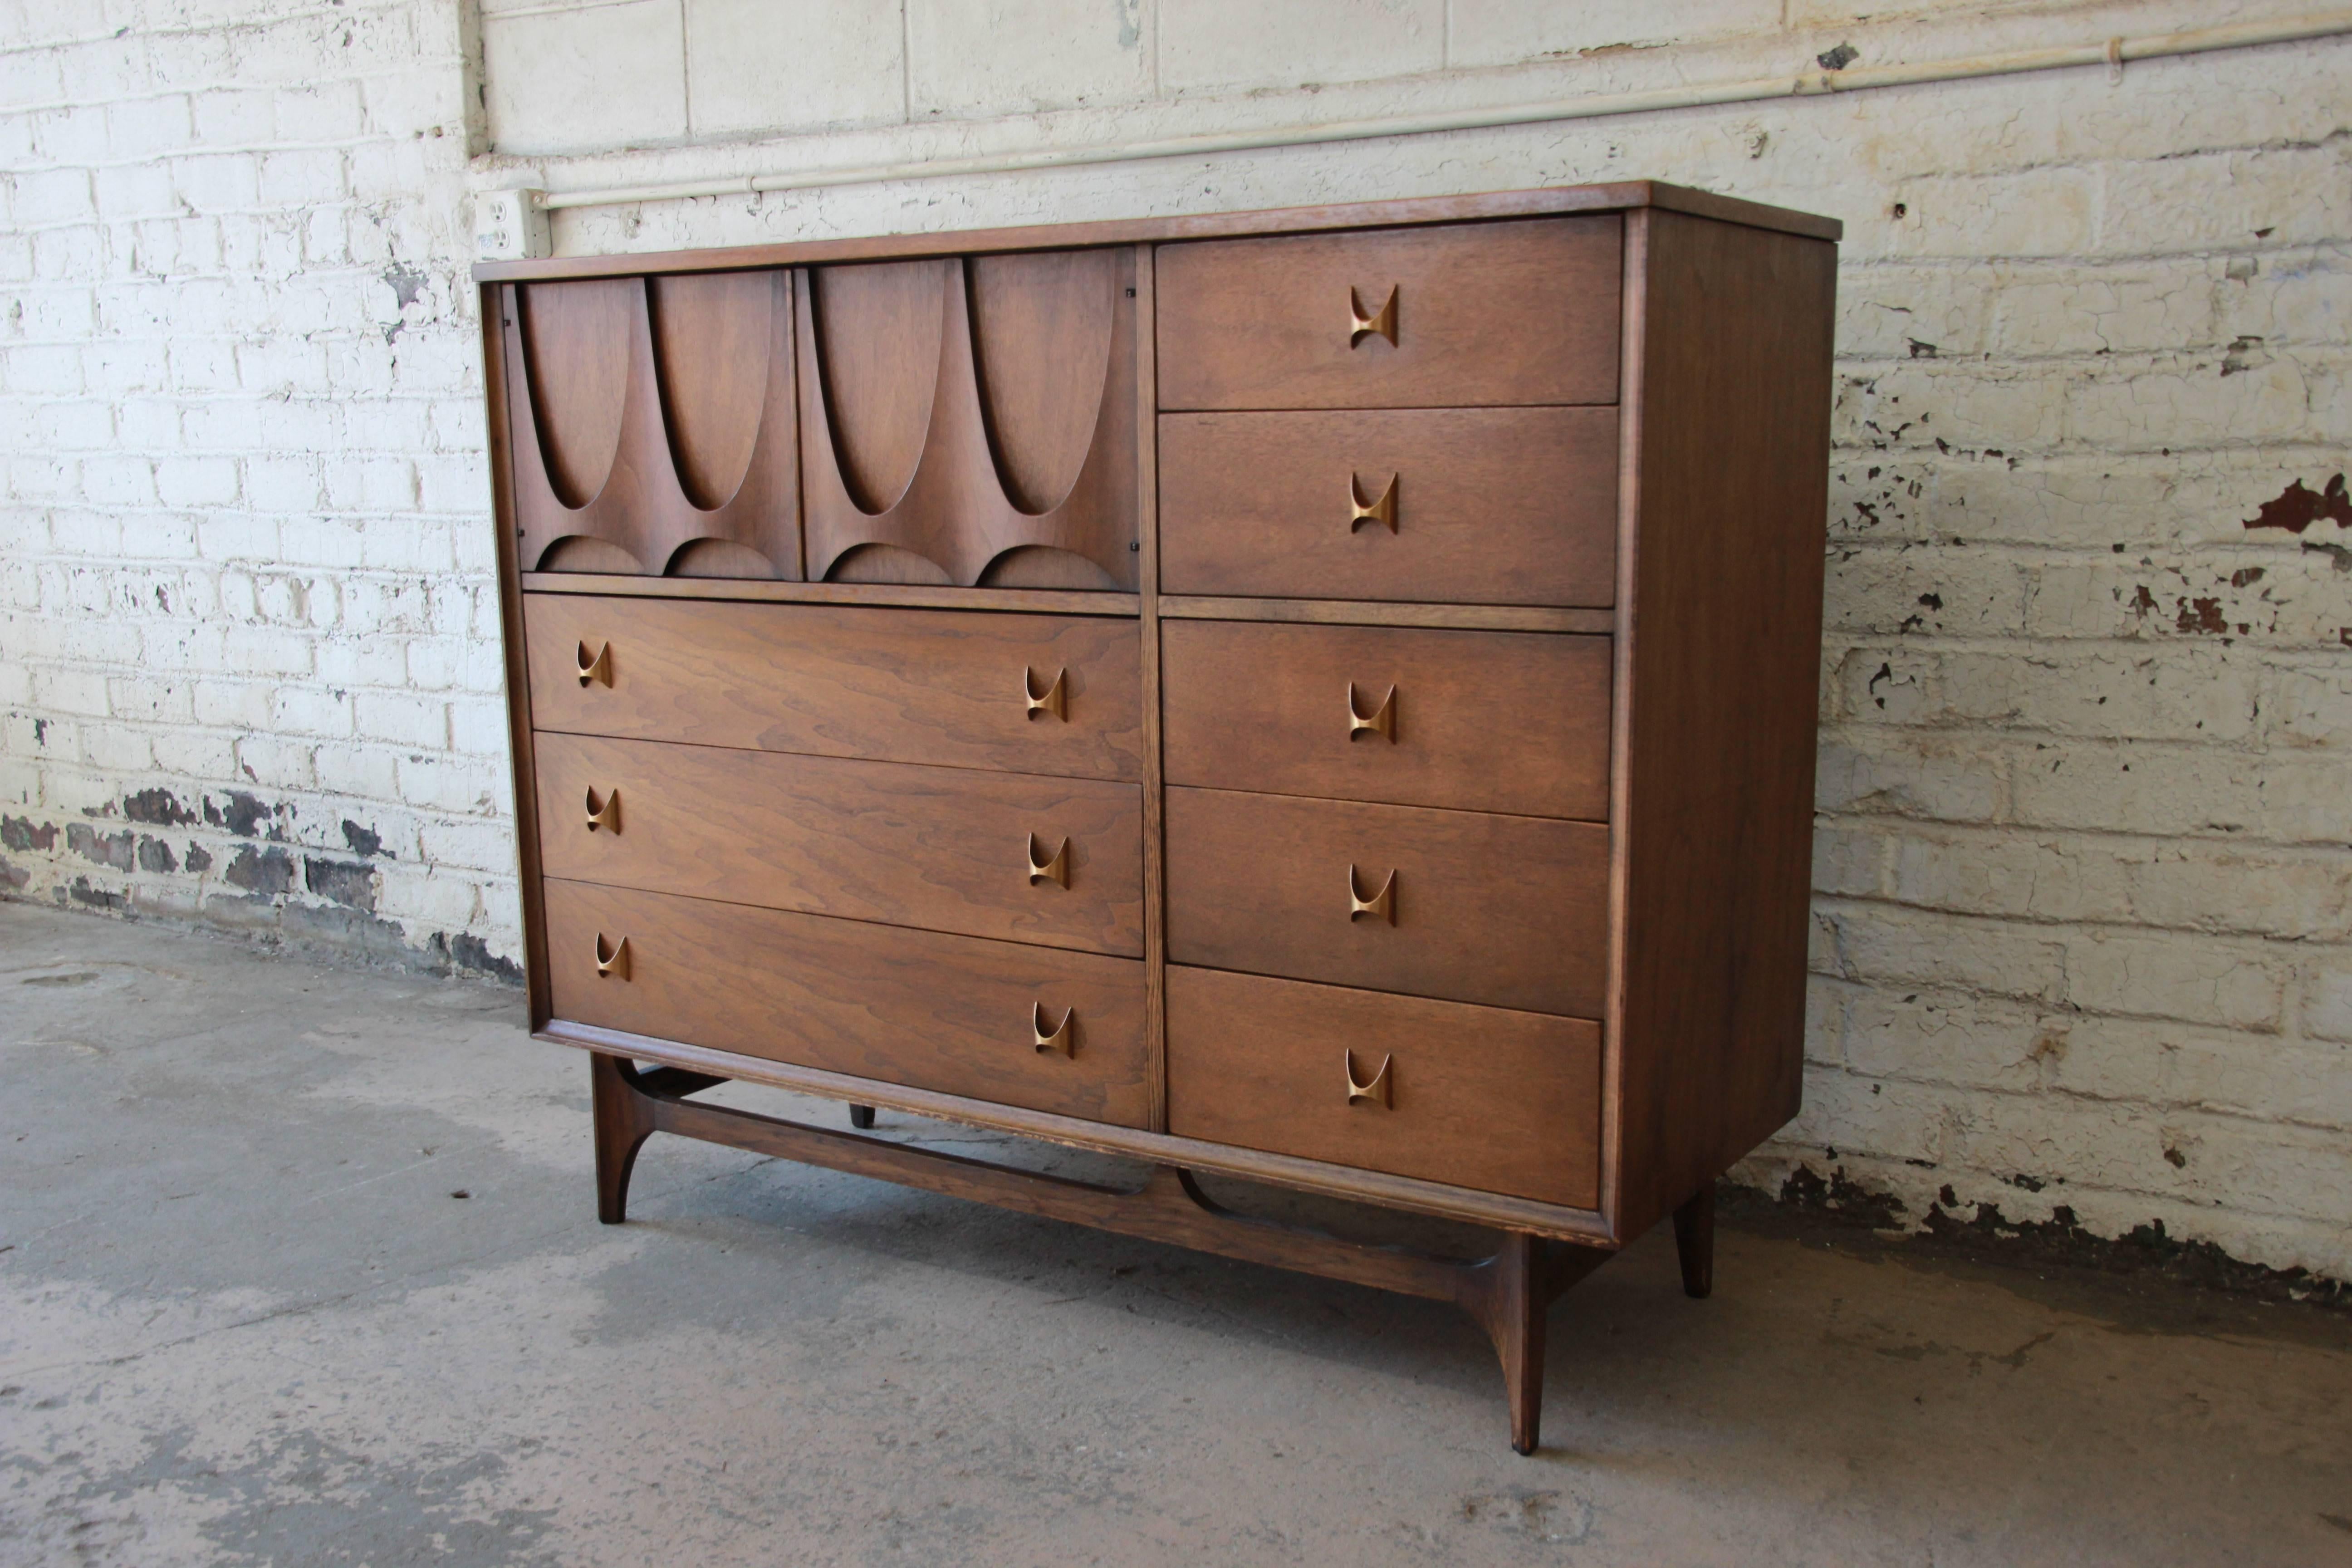 An outstanding Mid-Century walnut highboy dresser or chest of drawers from the Broyhill Brasilia line, circa 1960s. The chest features eight dovetailed drawers with signature brass handles. Includes open storage with two dividers behind sculpted